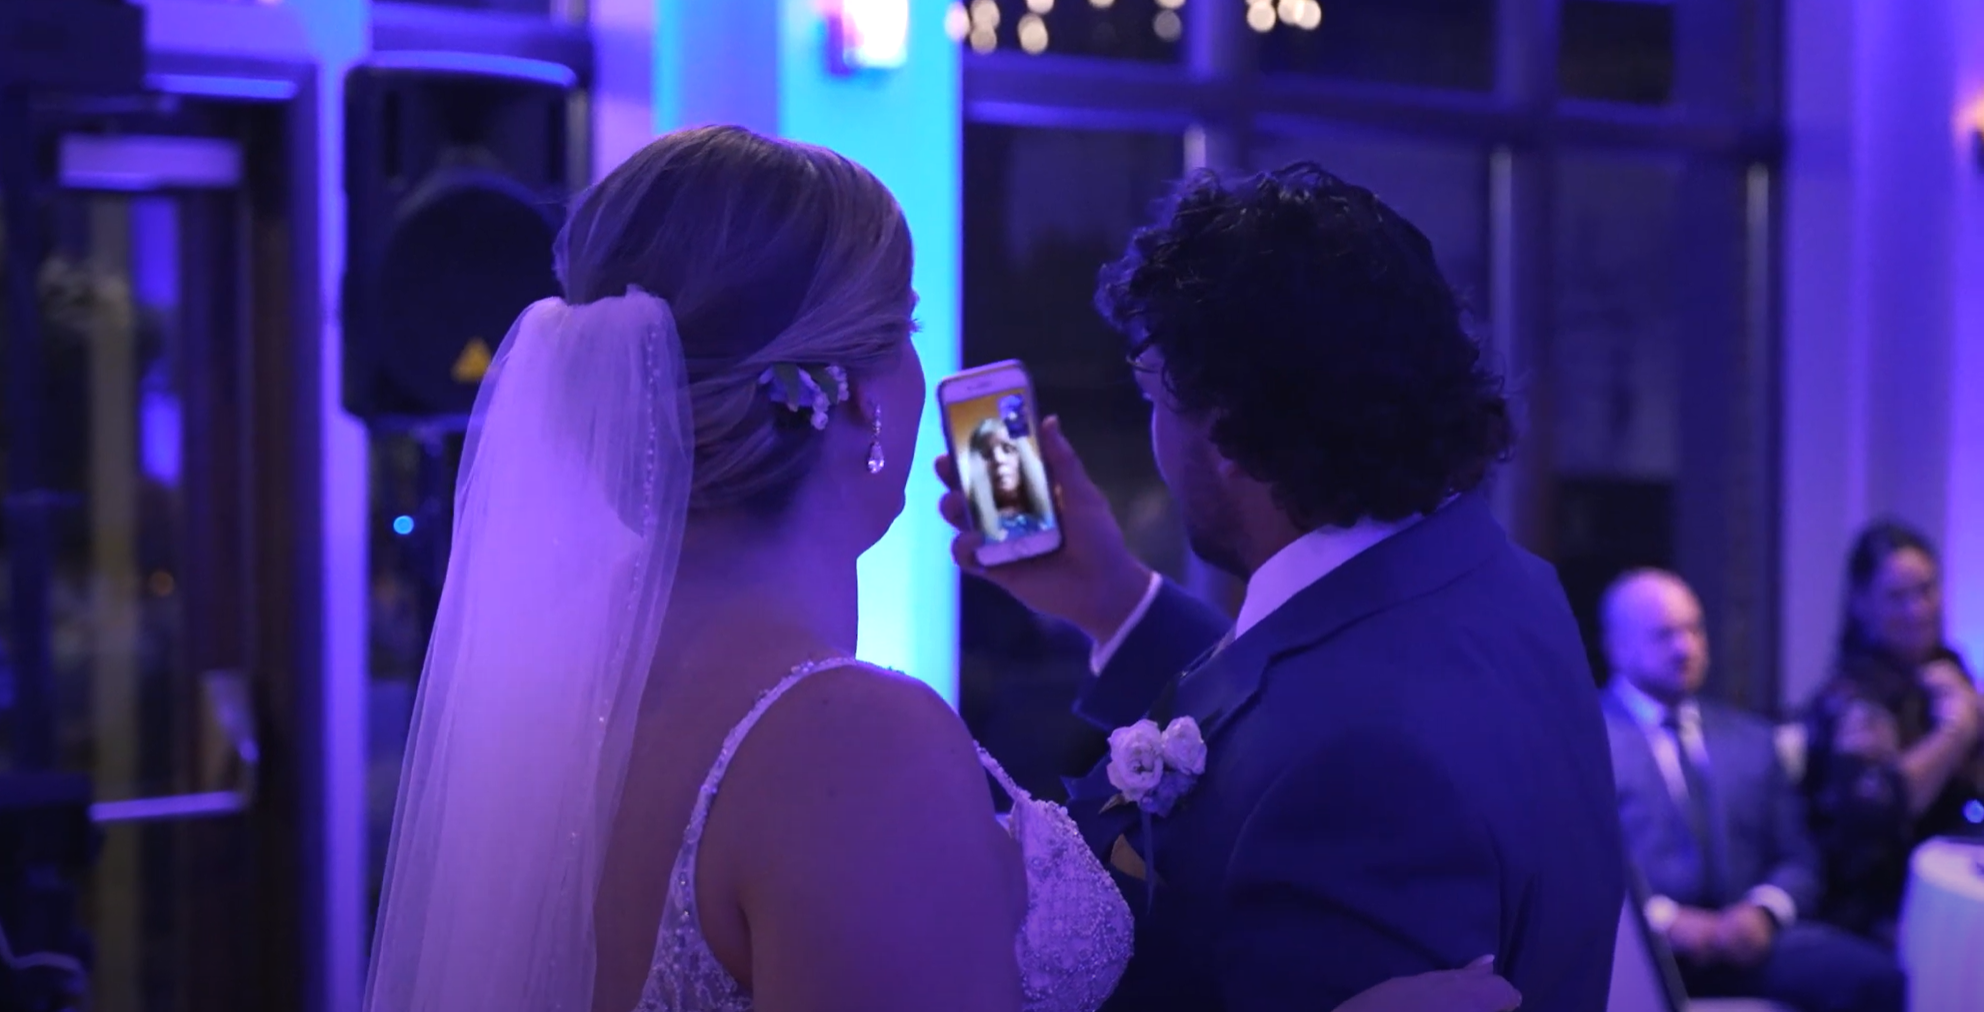 Wedding reception with skype during Covid-19